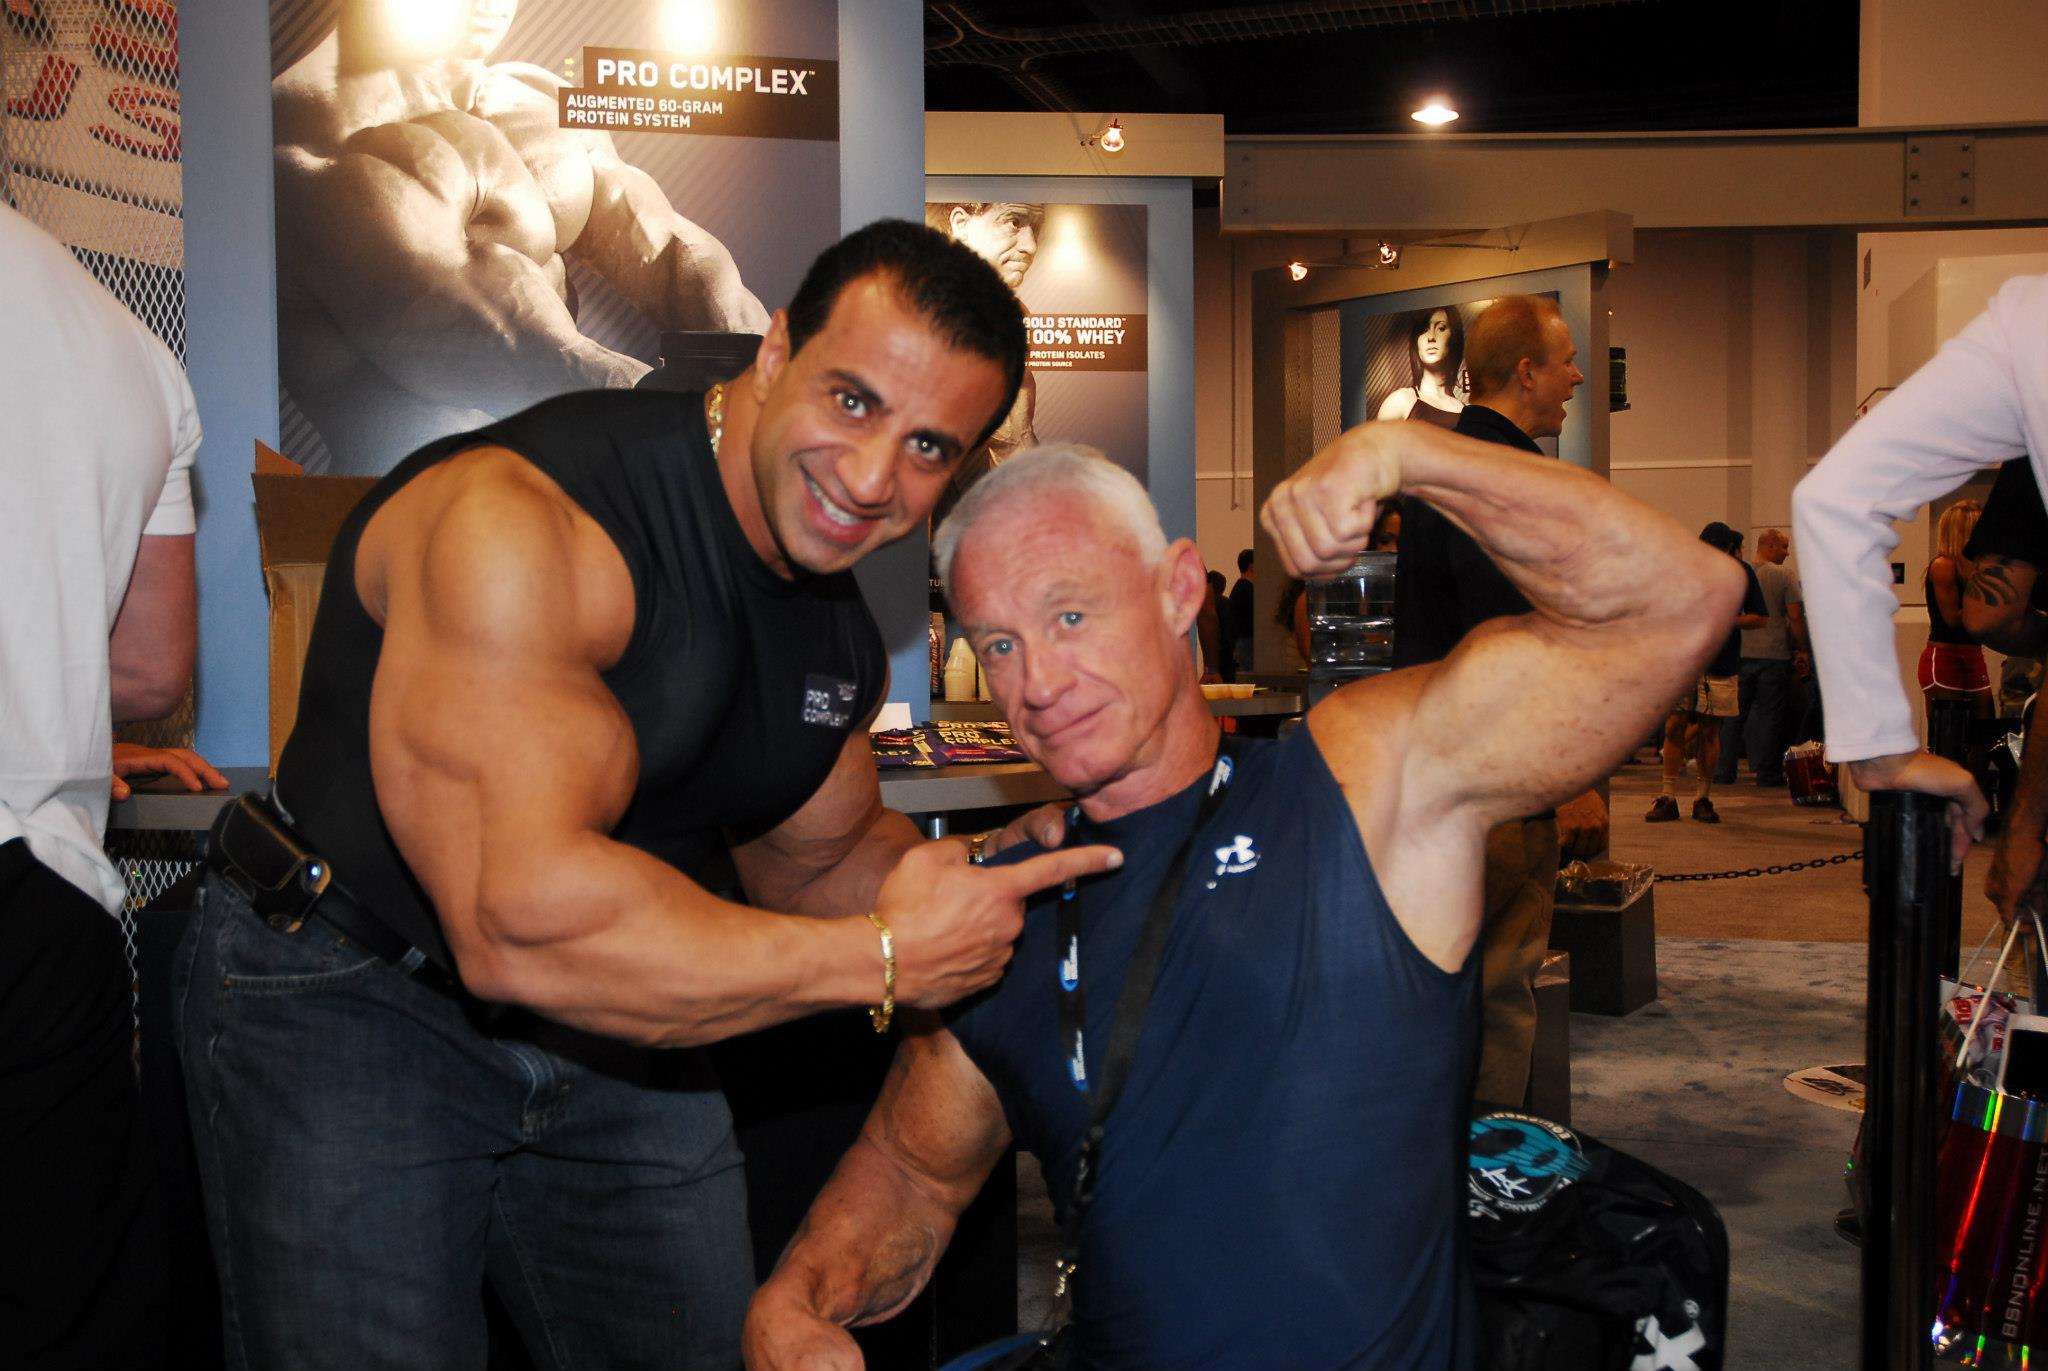 Jack McCann and George Farrah at the Arnold Sports Festival Expo in 2012